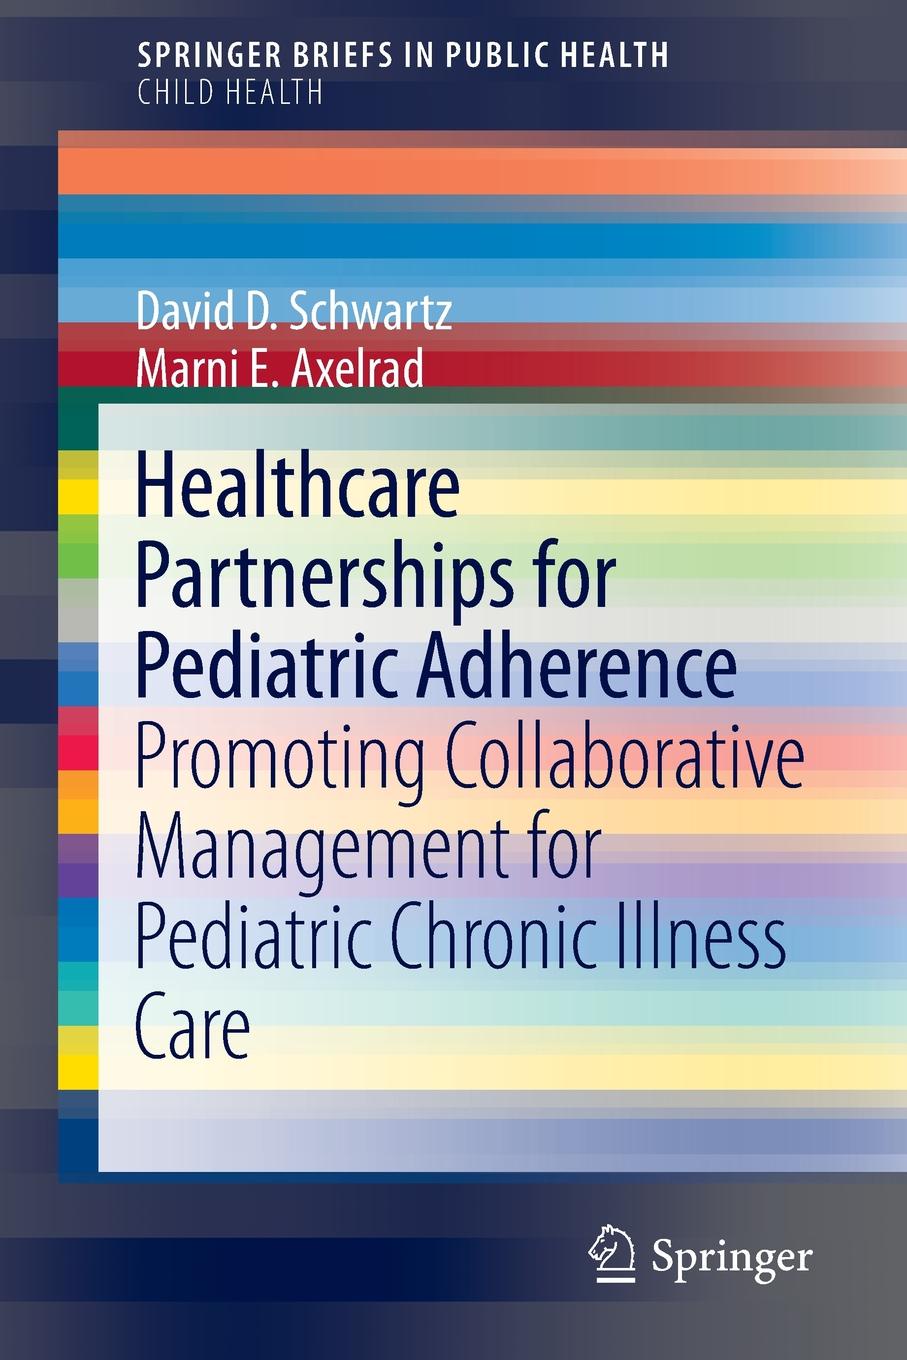 Healthcare Partnerships for Pediatric Adherence. Promoting Collaborative Management for Pediatric Chronic Illness Care